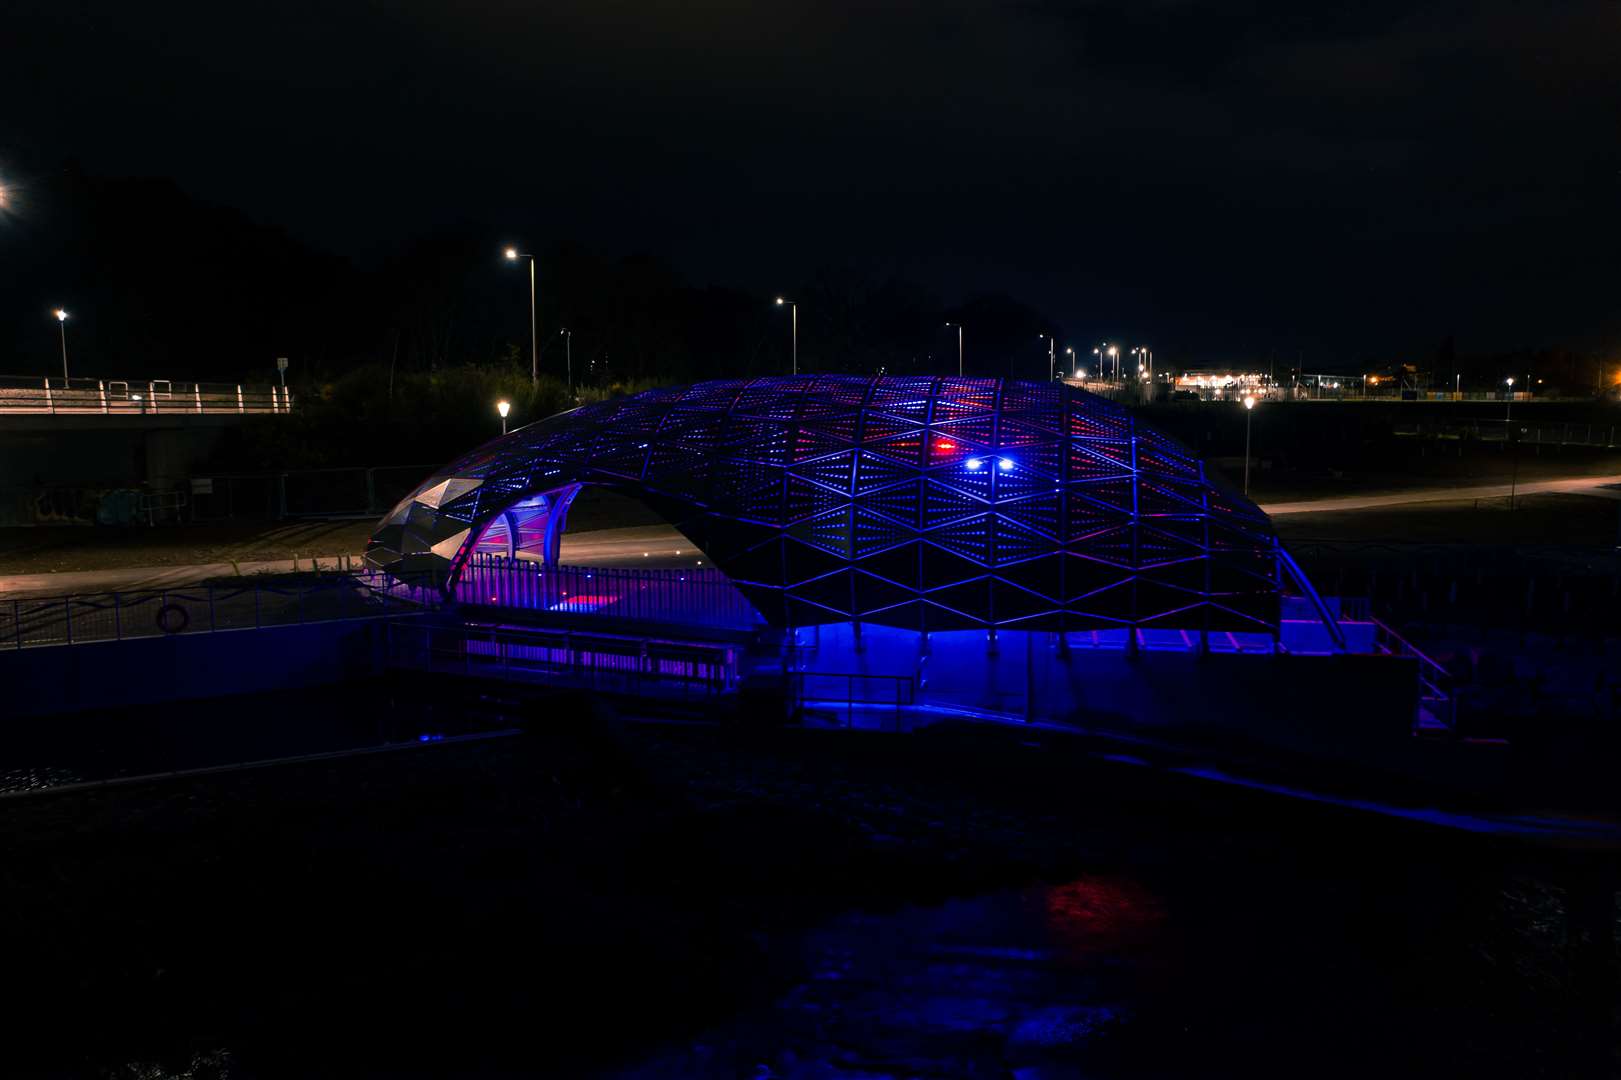 Hydro Ness was lit up in red and blue to mark the anniversary of the Battle of Culloden.